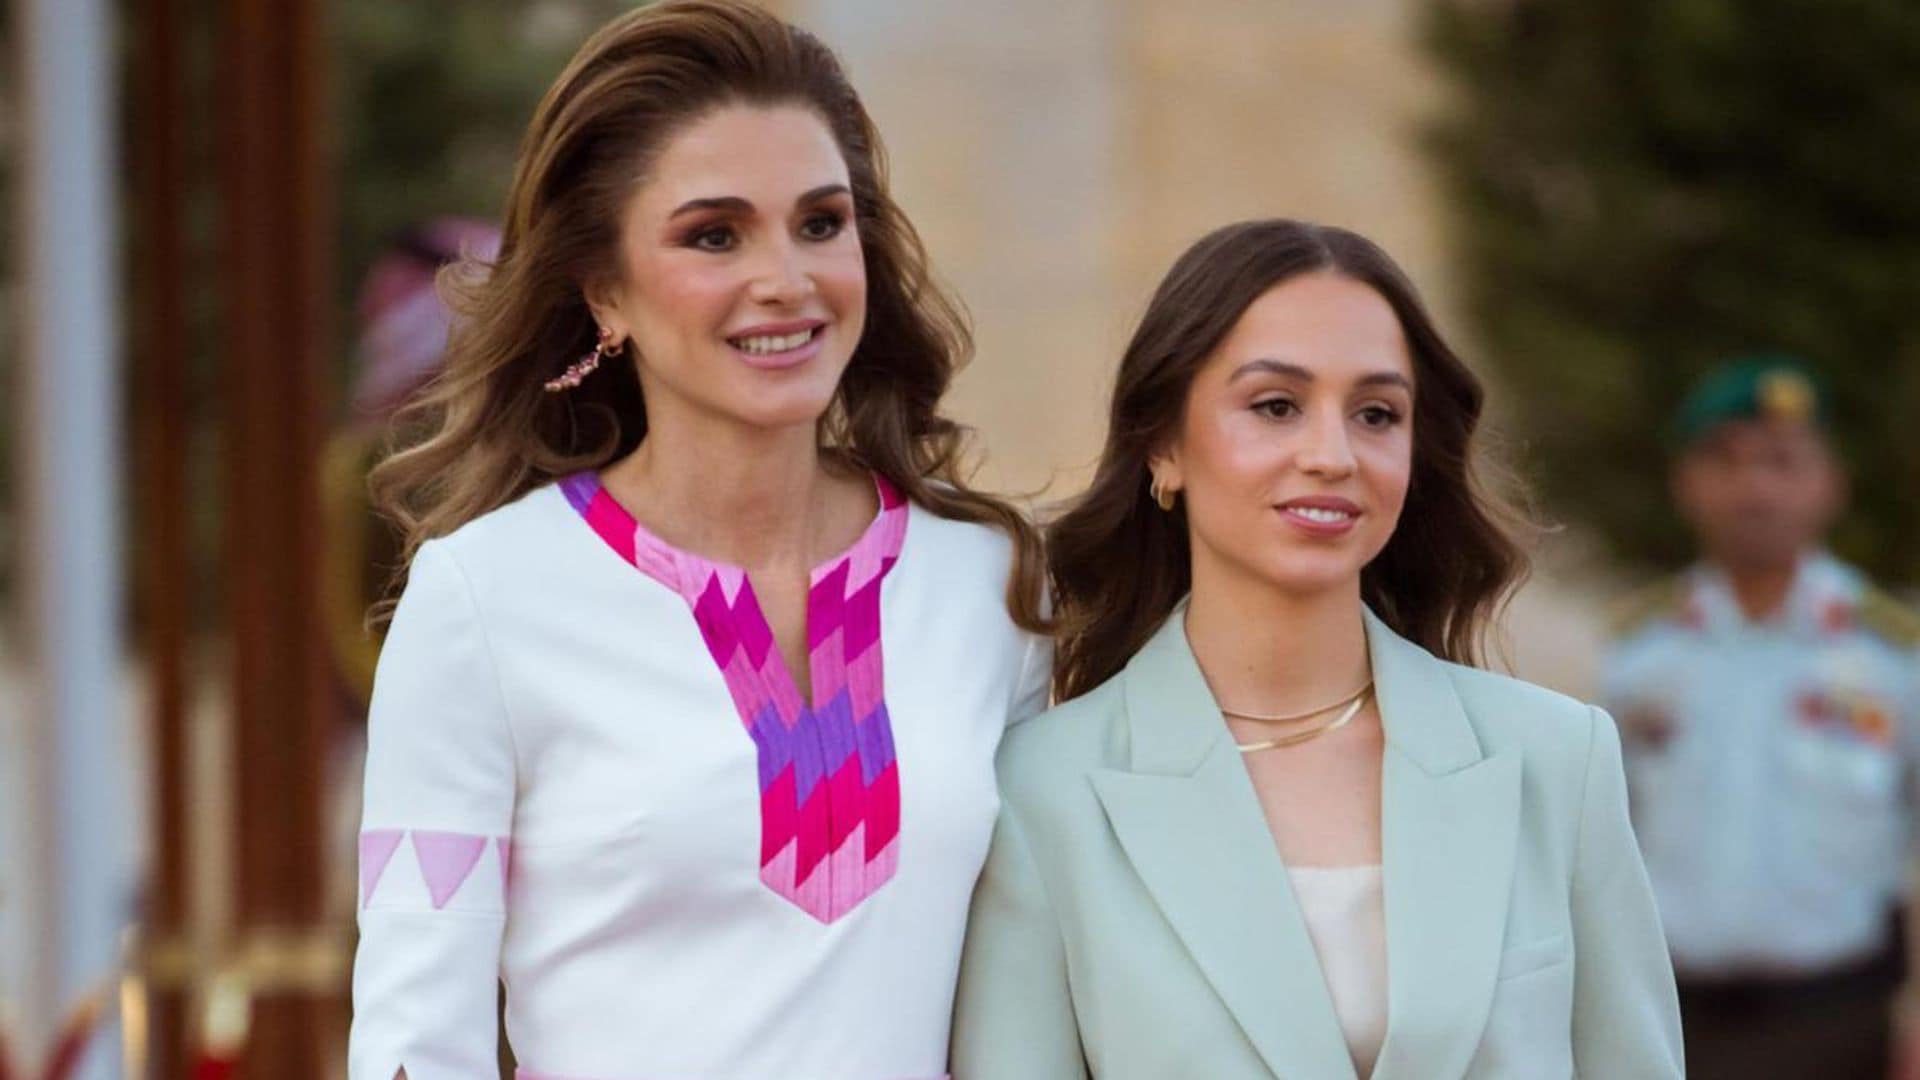 Did Queen Rania reveal her daughter's wedding tiara and veil?